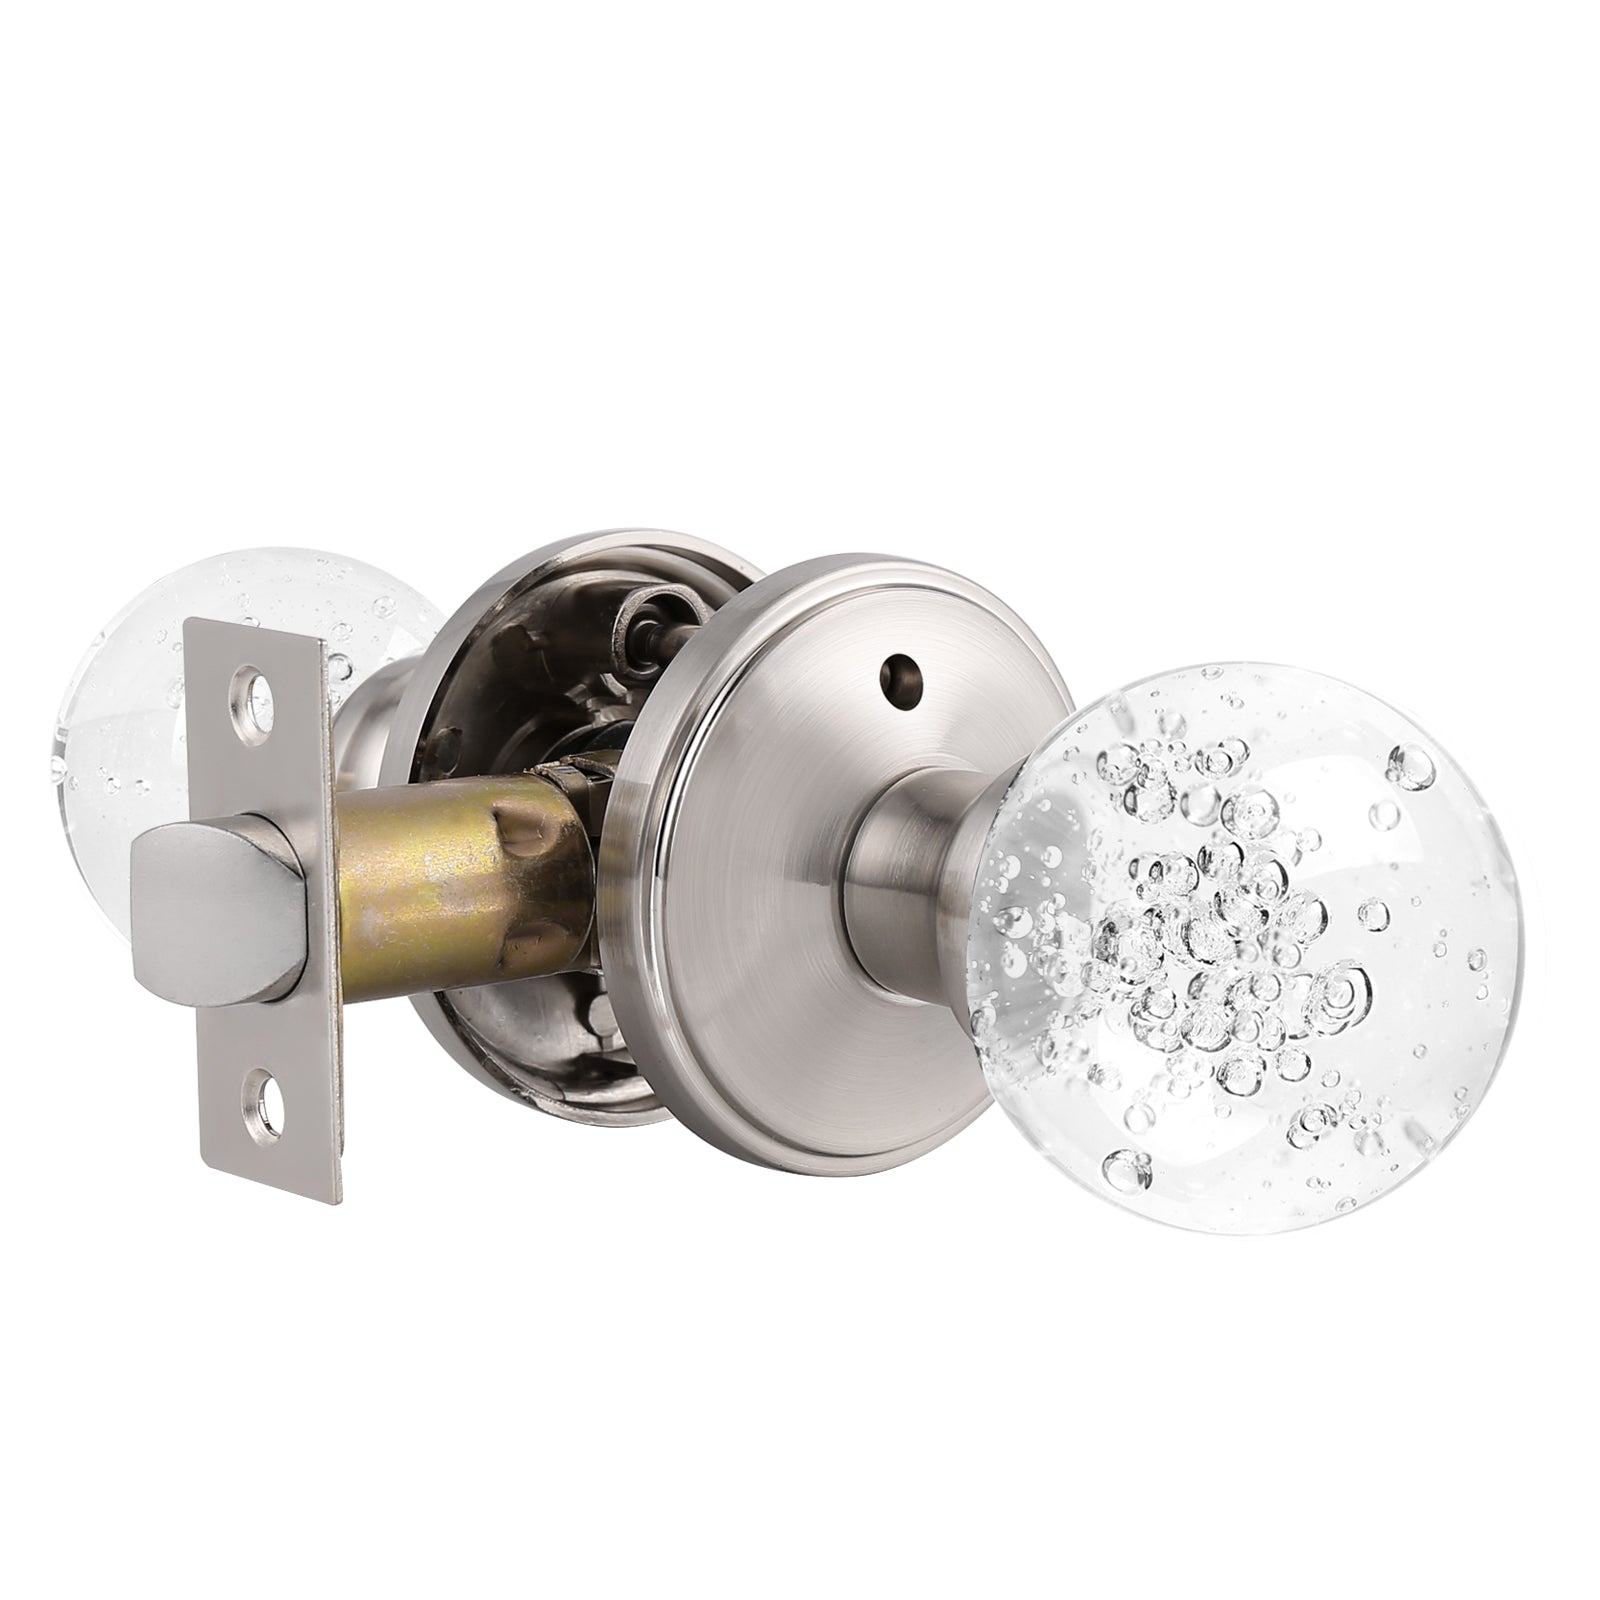 Crystal Glass Door Knobs in Round Ball Style, Passage/Privacy Knob, Satin Nickel Finish DLC23BOSN